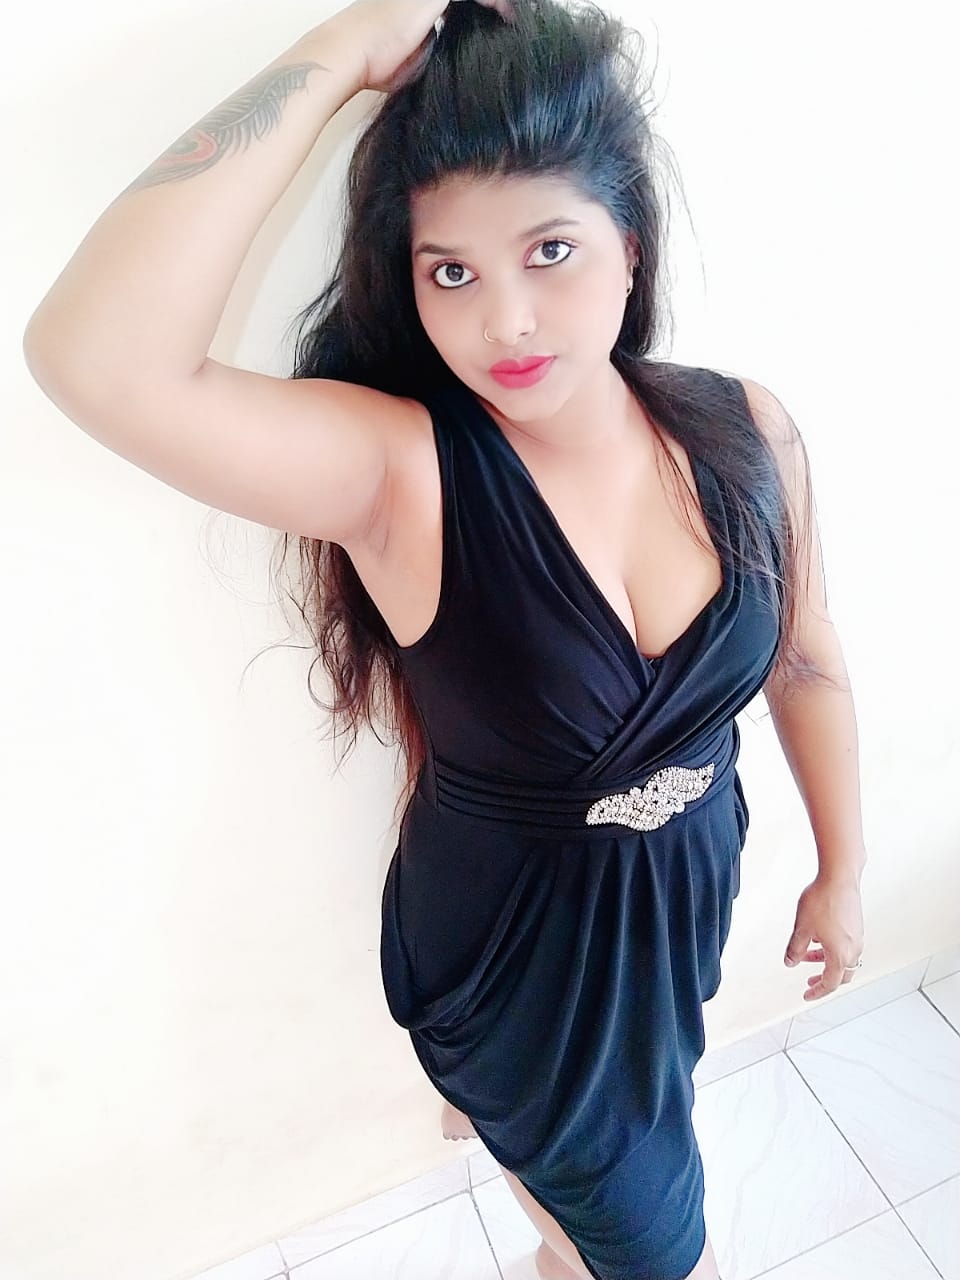 % GENUINE lonavala CALL GIRL SERVICE IN HOUR AVAILABLE SERVICE